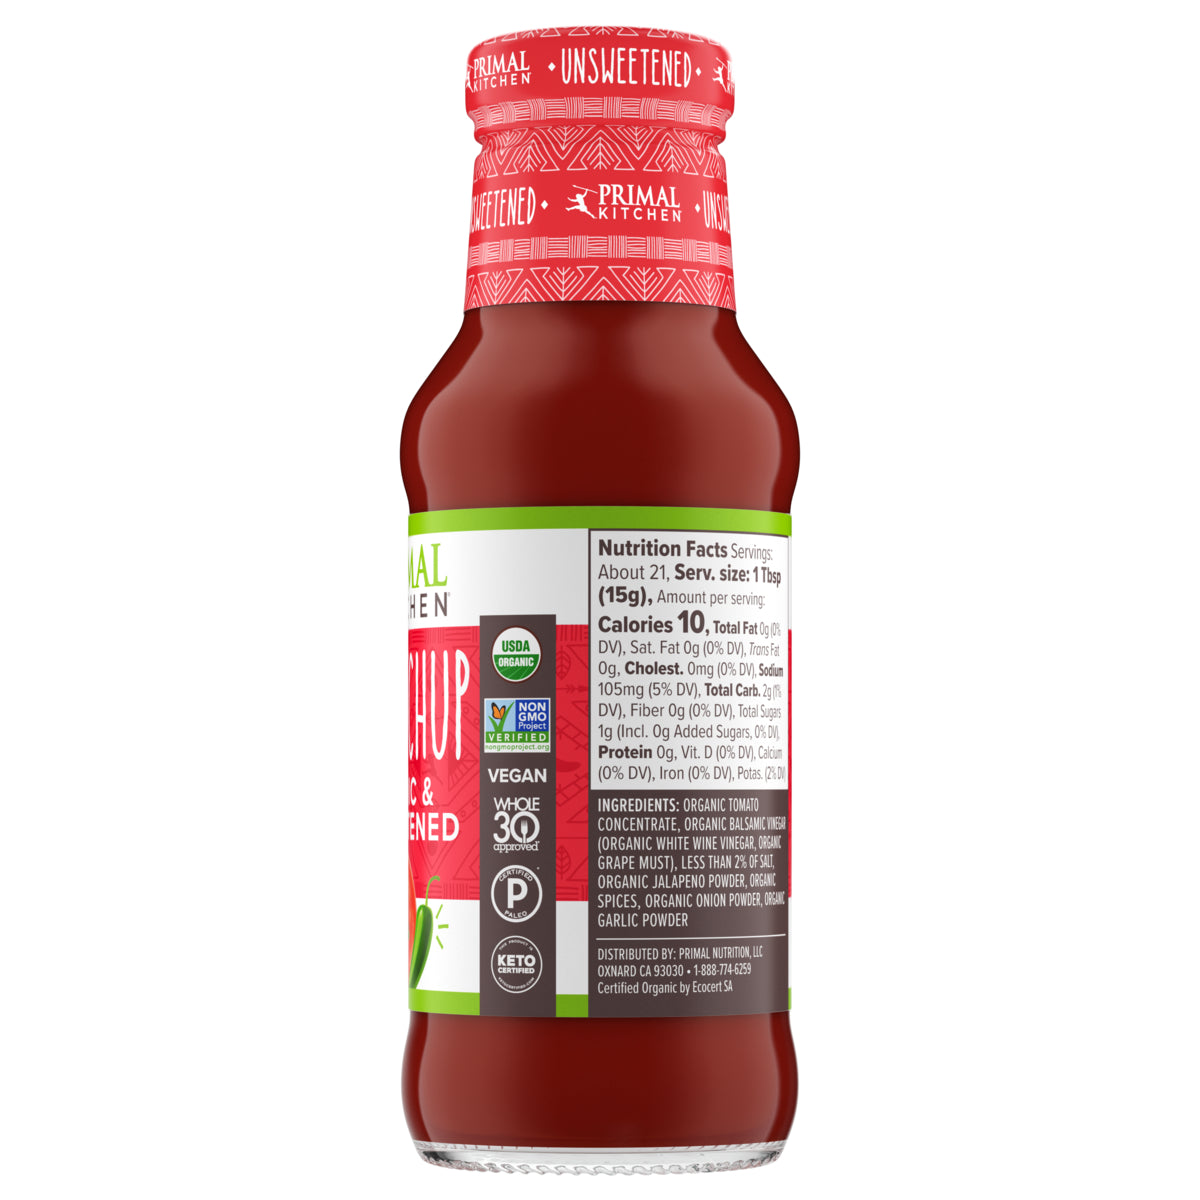 Backside of Primal Kitchen Spicy Organic Unsweetened Ketchup showing nutrition facts and ingredients list